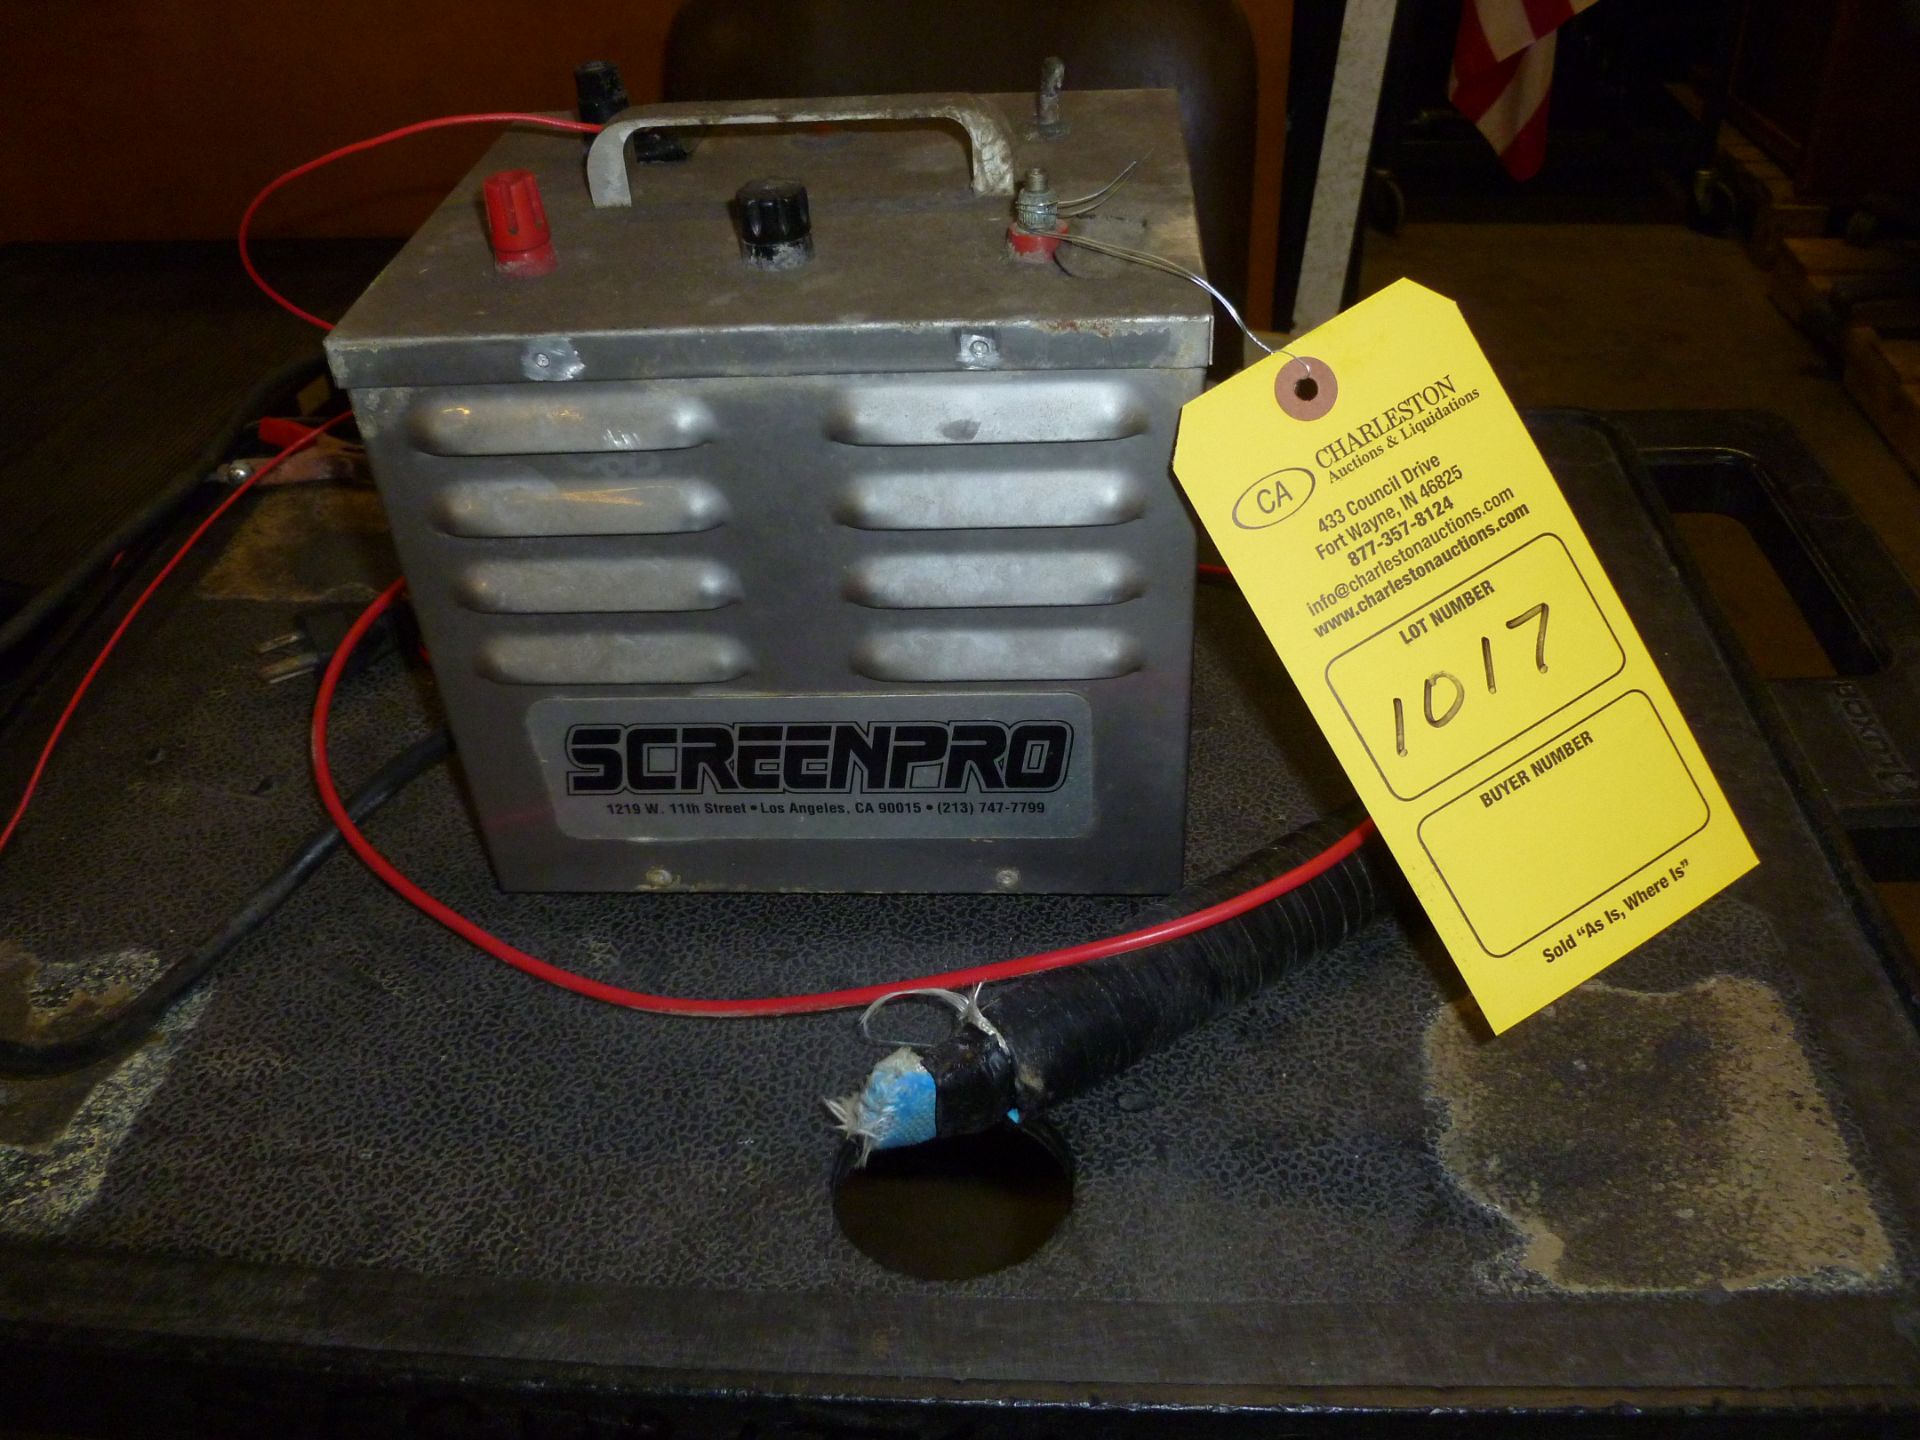 SCREENPRO HEAT (LOCATED AT 6901 ARDMORE AVE. FORT WAYNE, IN 46809) - Image 2 of 2